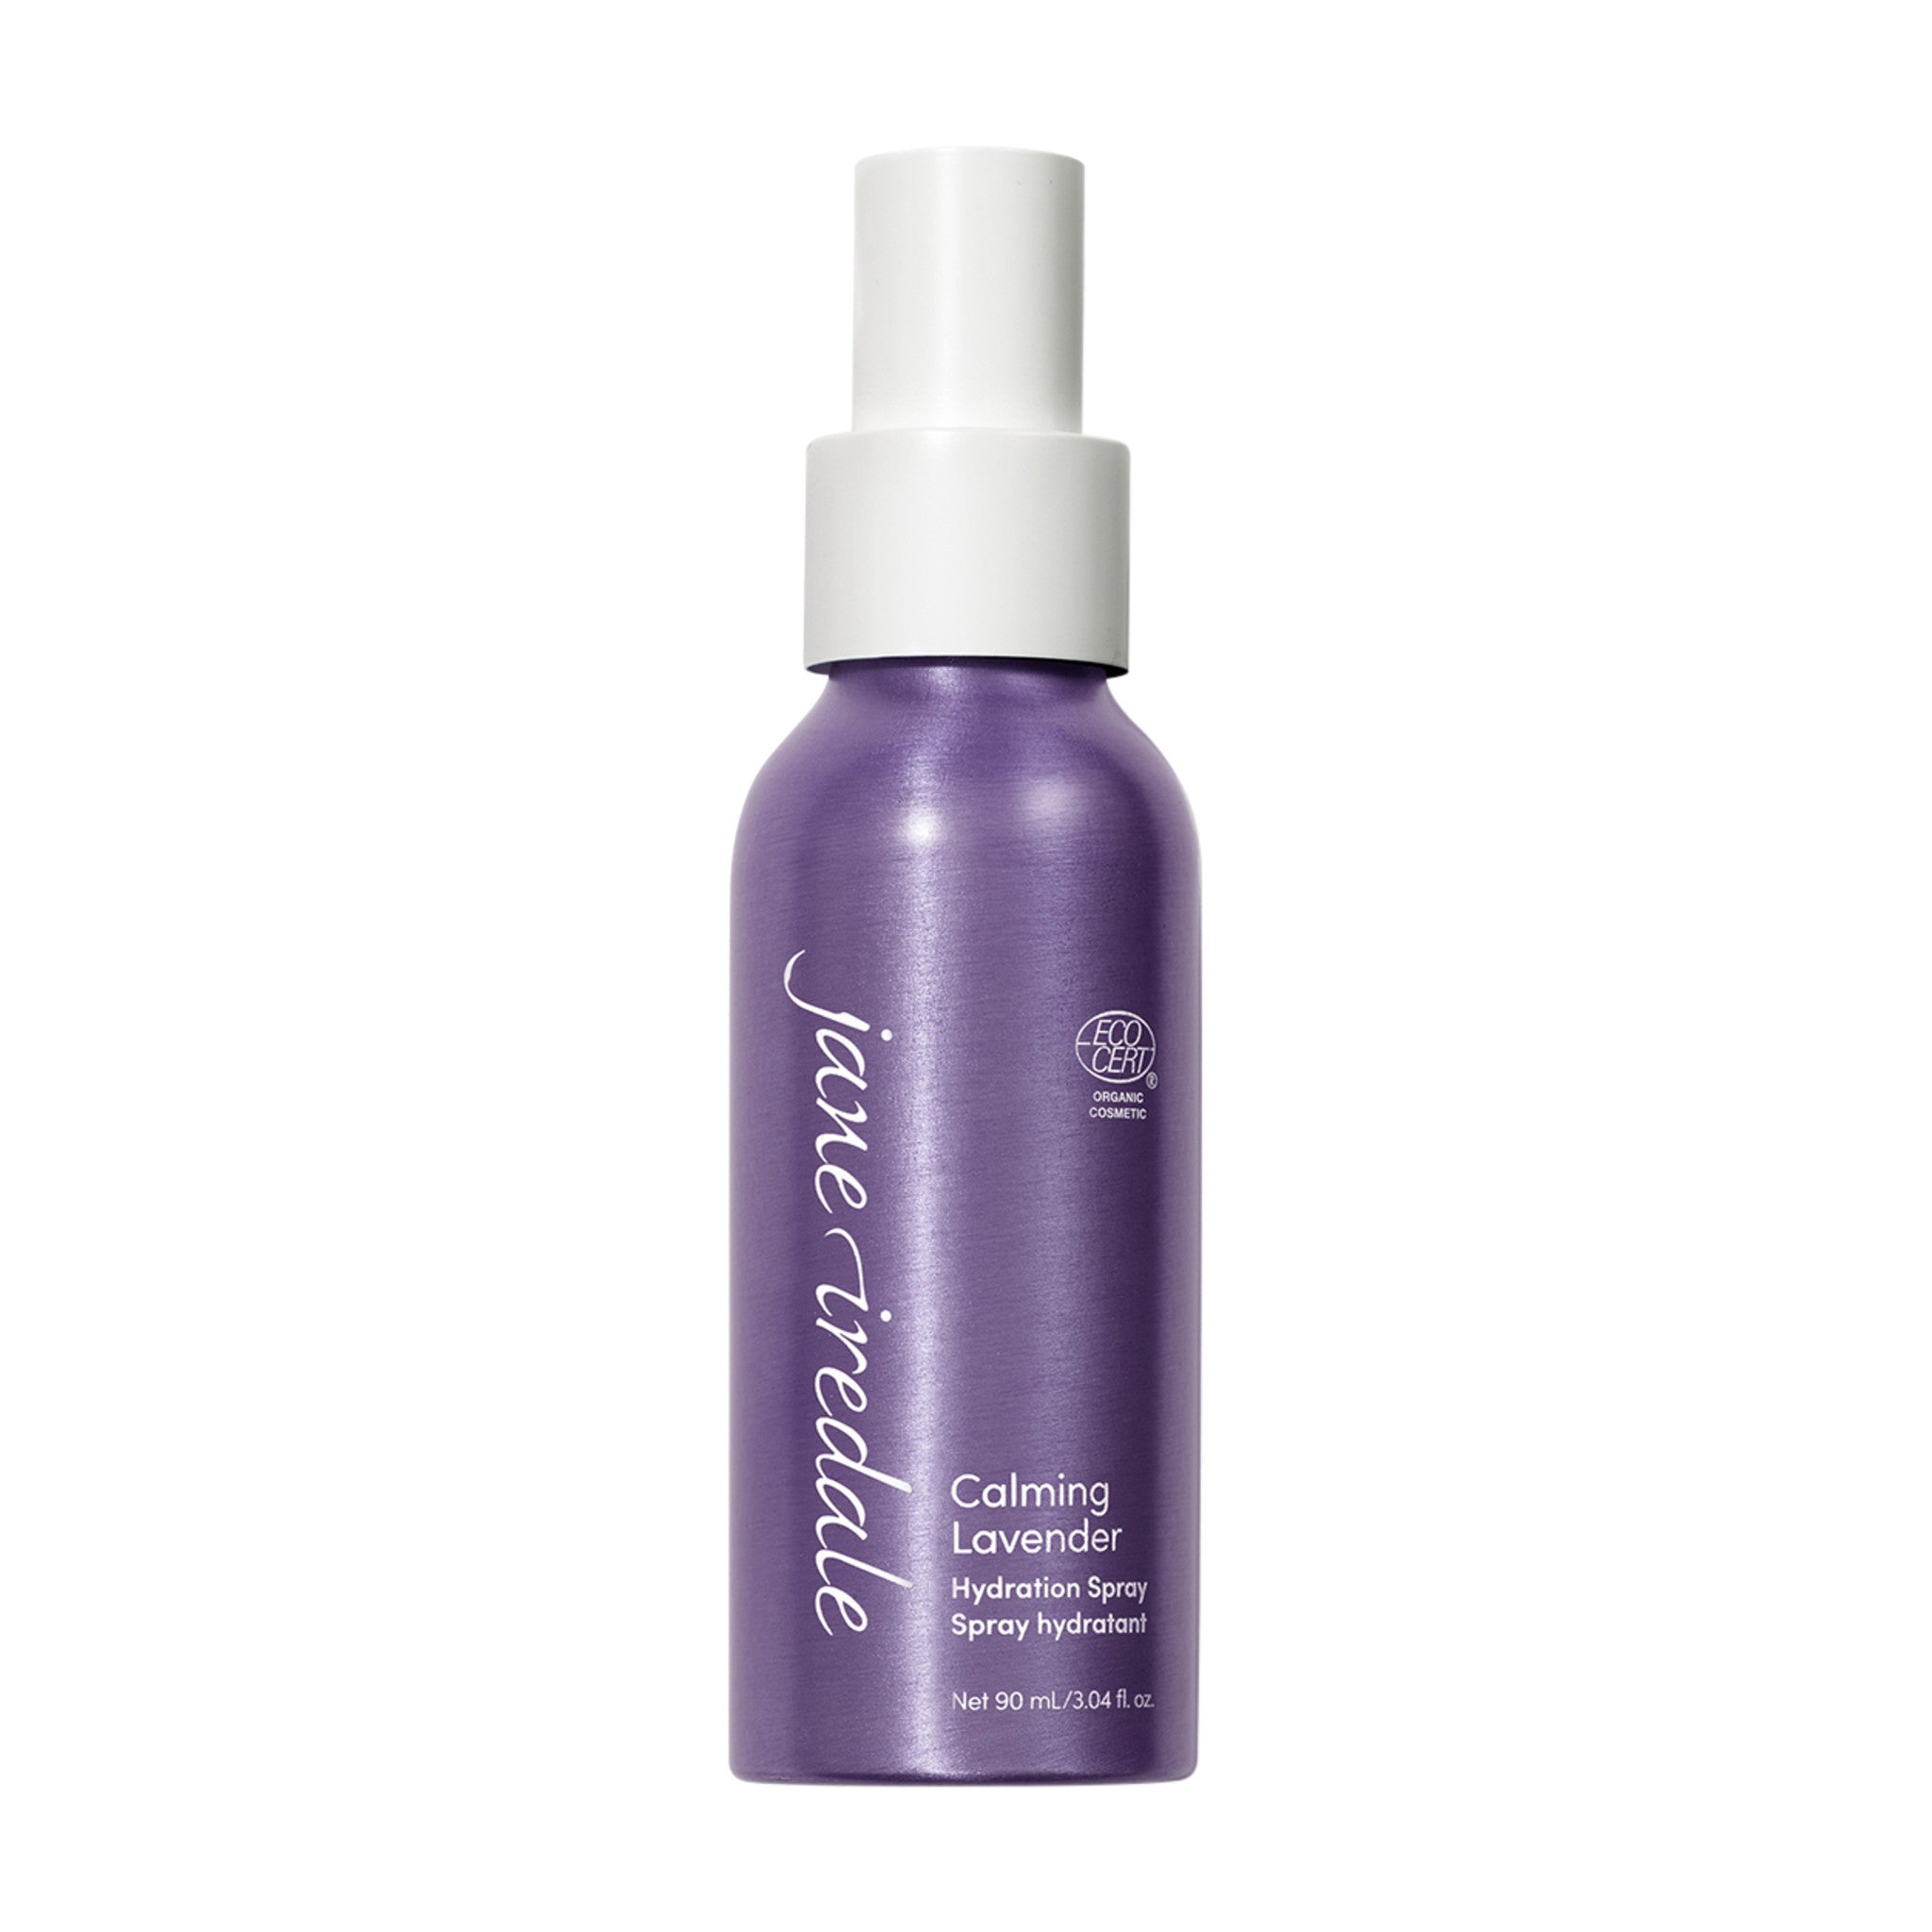 Jane Iredale Calming Lavender Hydration Spray Size variant: 90 ml main image.